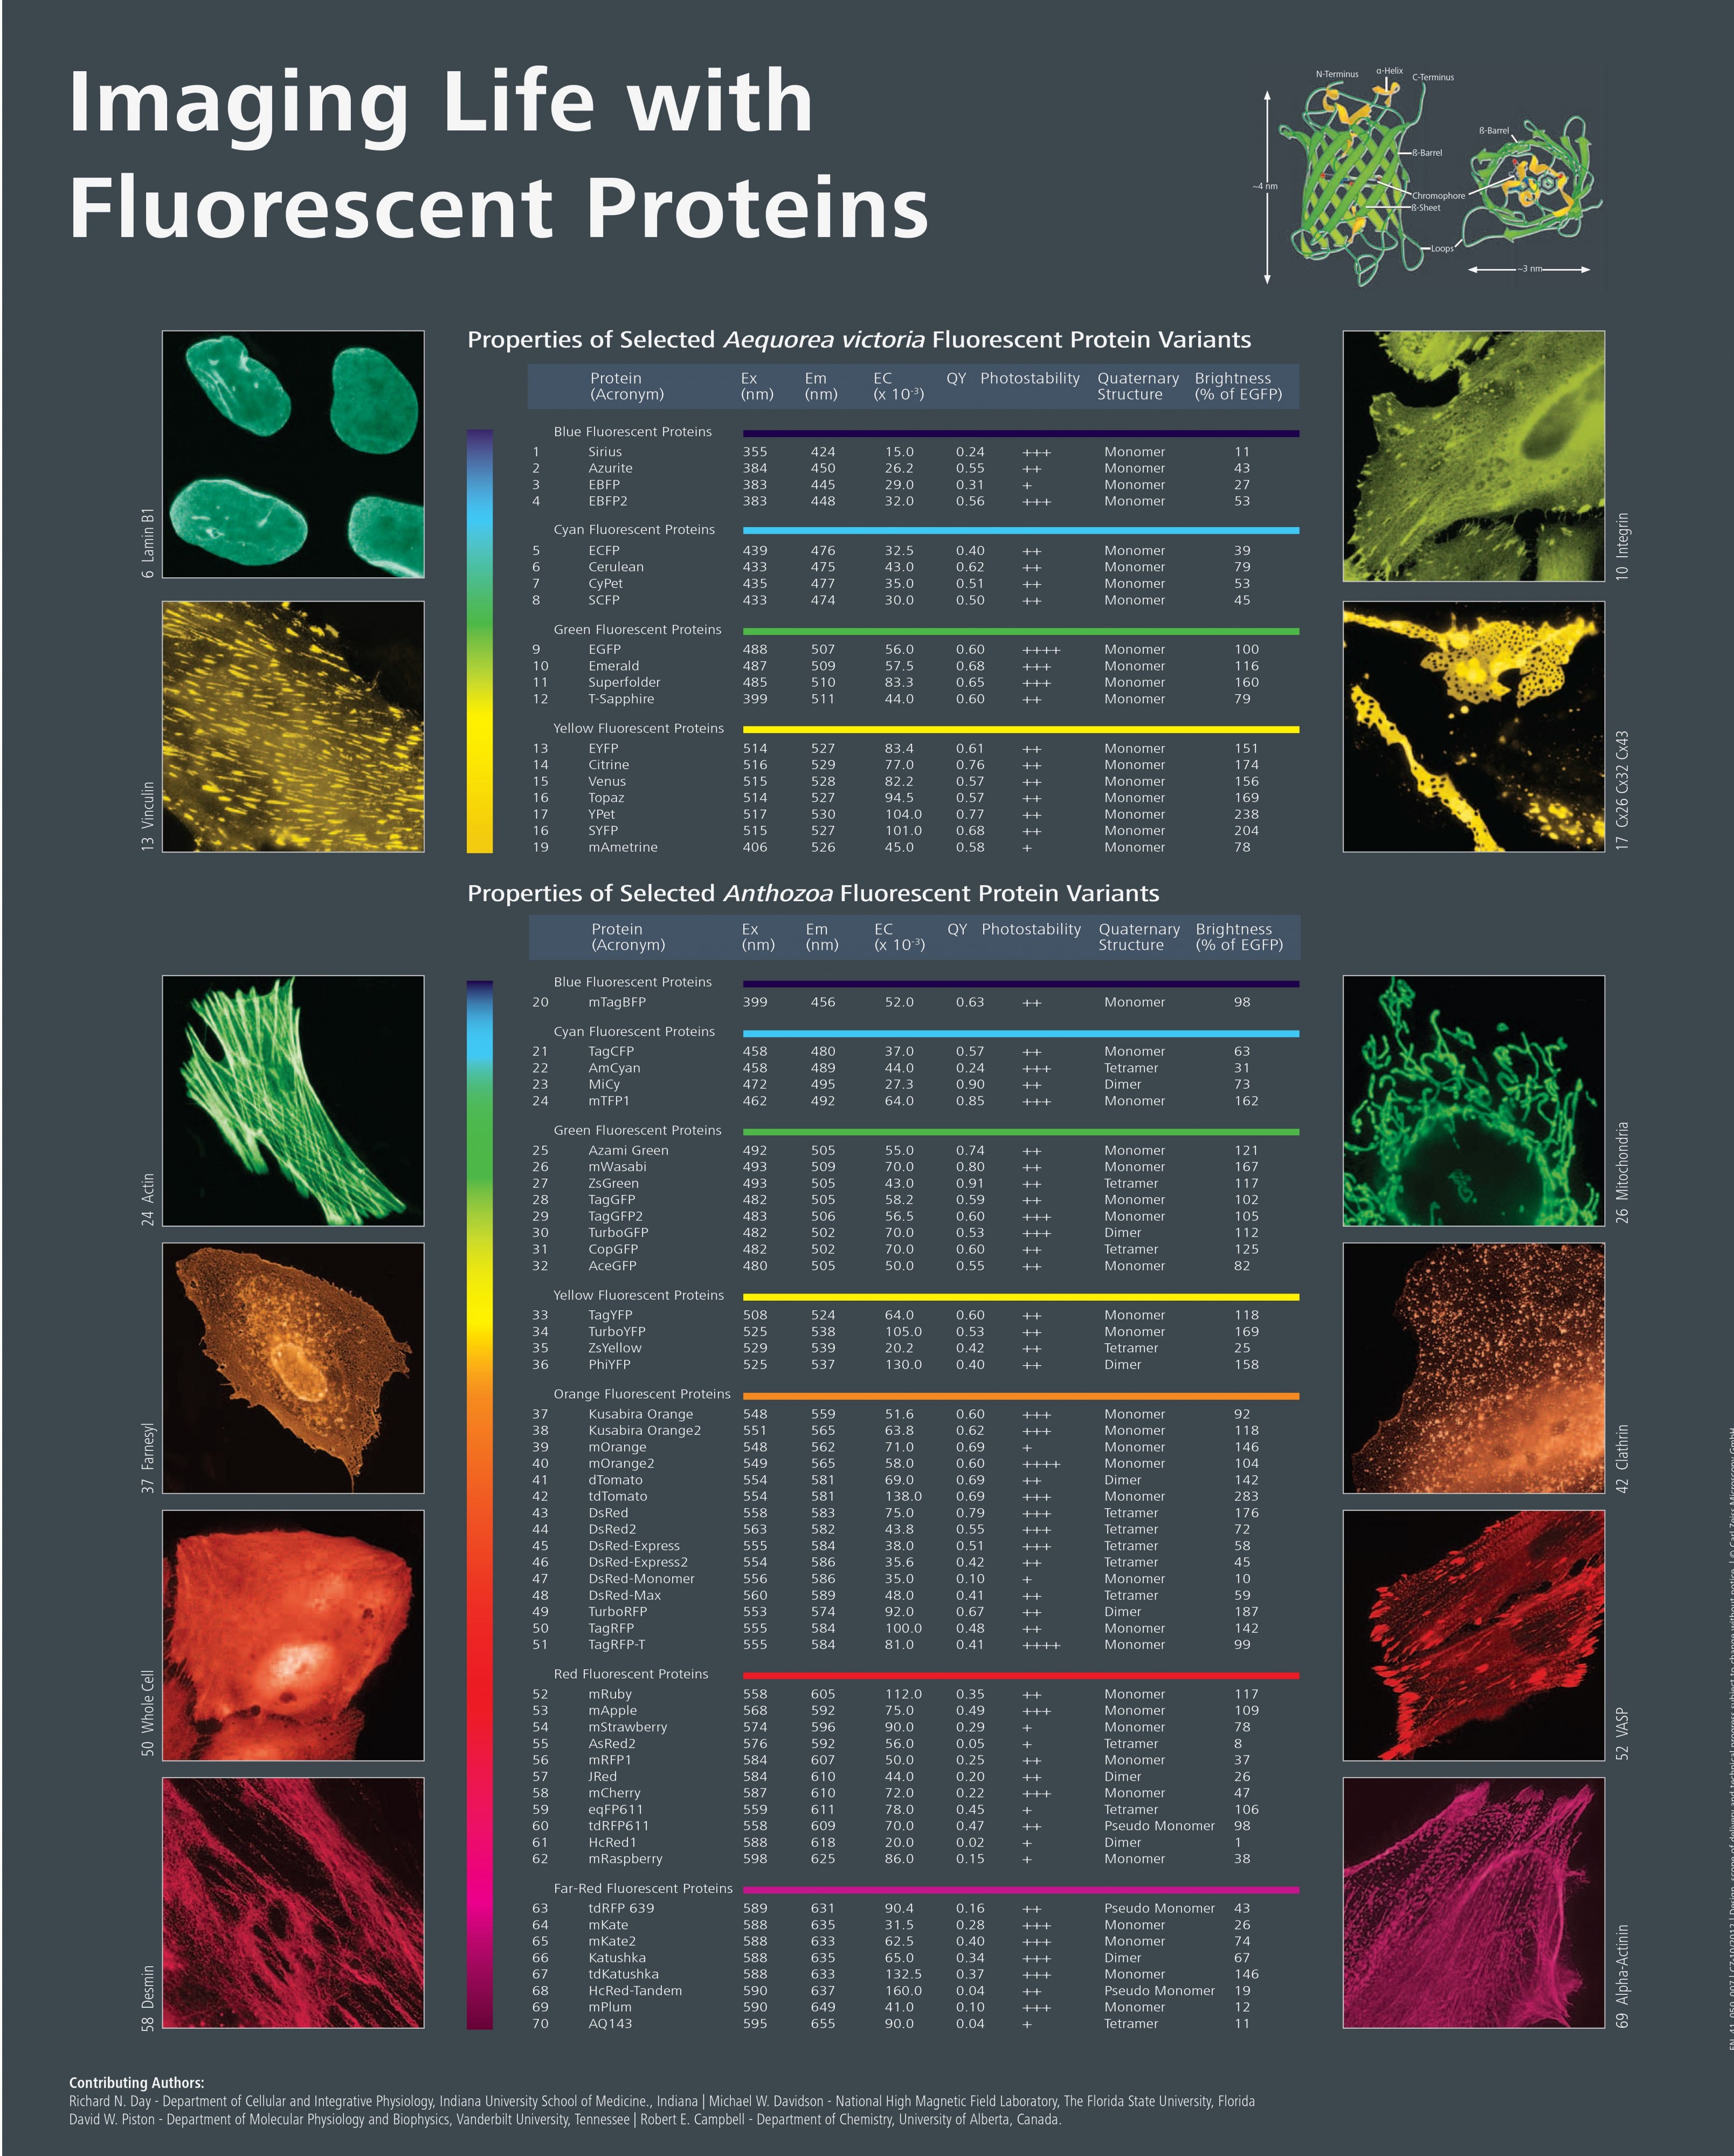 Imaging Life with Fluorescent Proteins (10690274384)